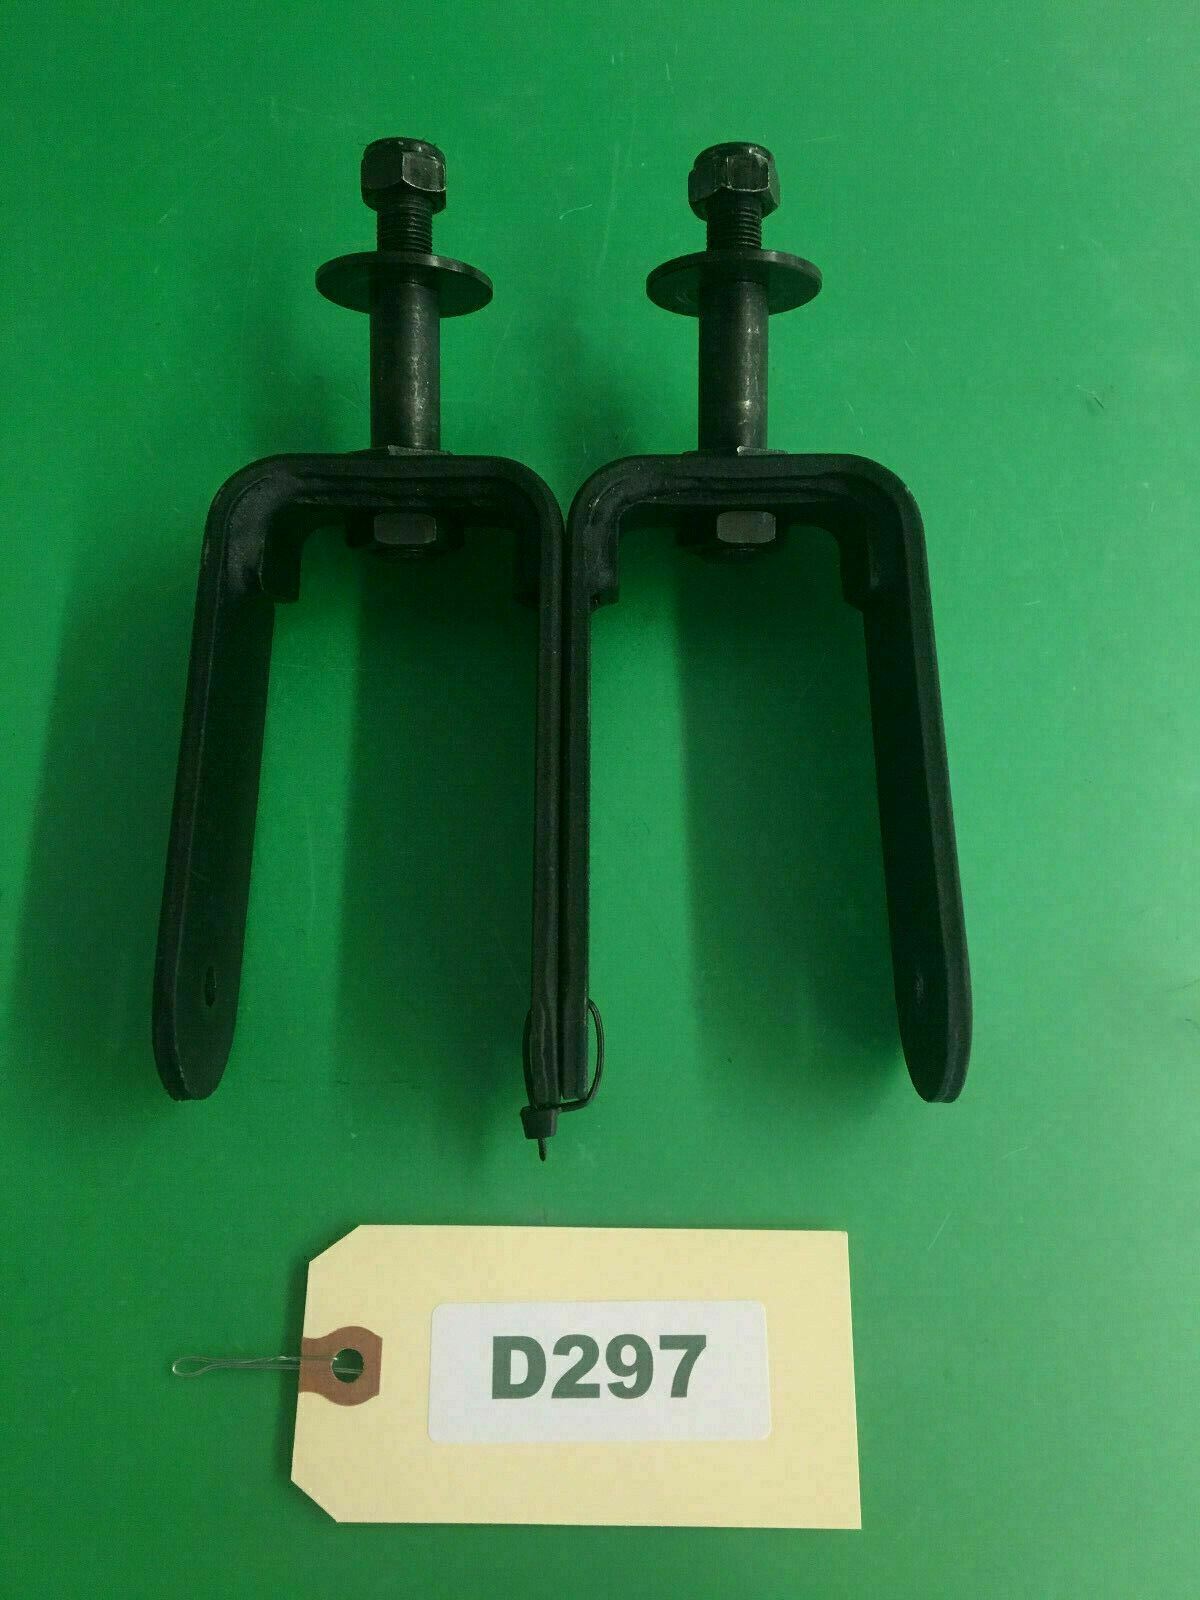 Rear Caster Forks for The Quantum J6 Power Wheelchair #D297